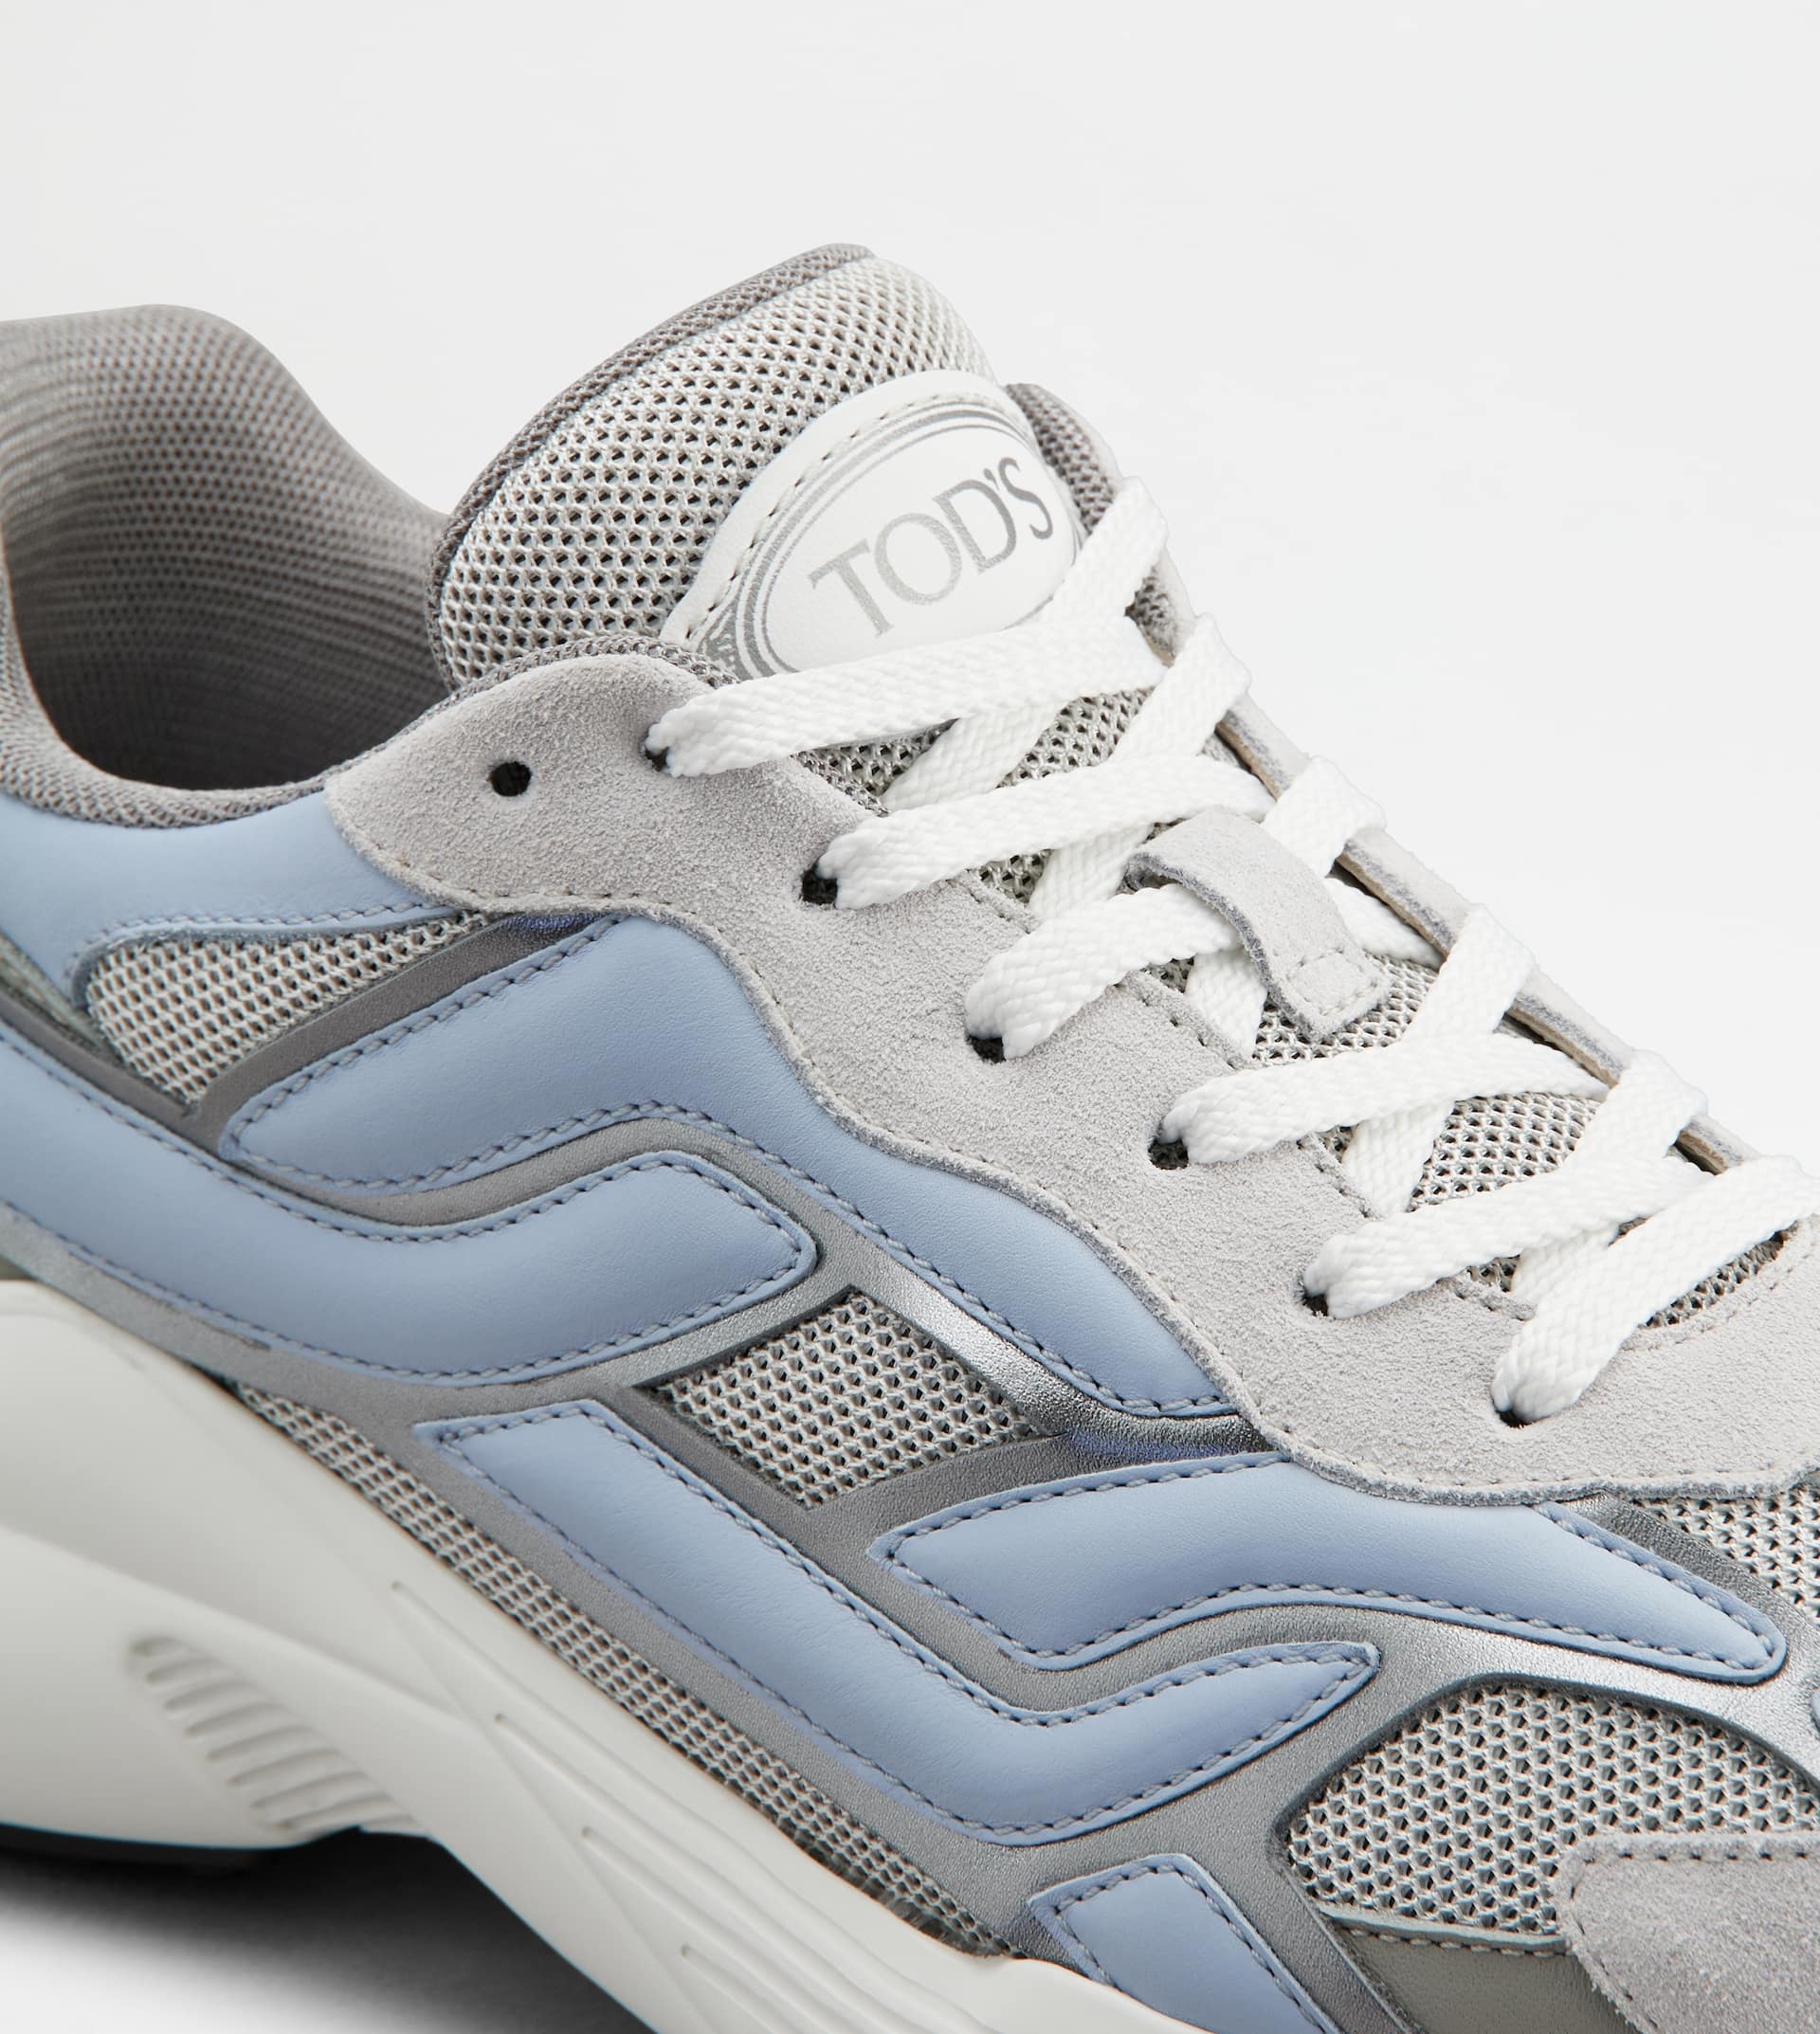 SNEAKERS IN LEATHER AND TECHNICAL FABRIC - SKY BLUE, GREY - 6